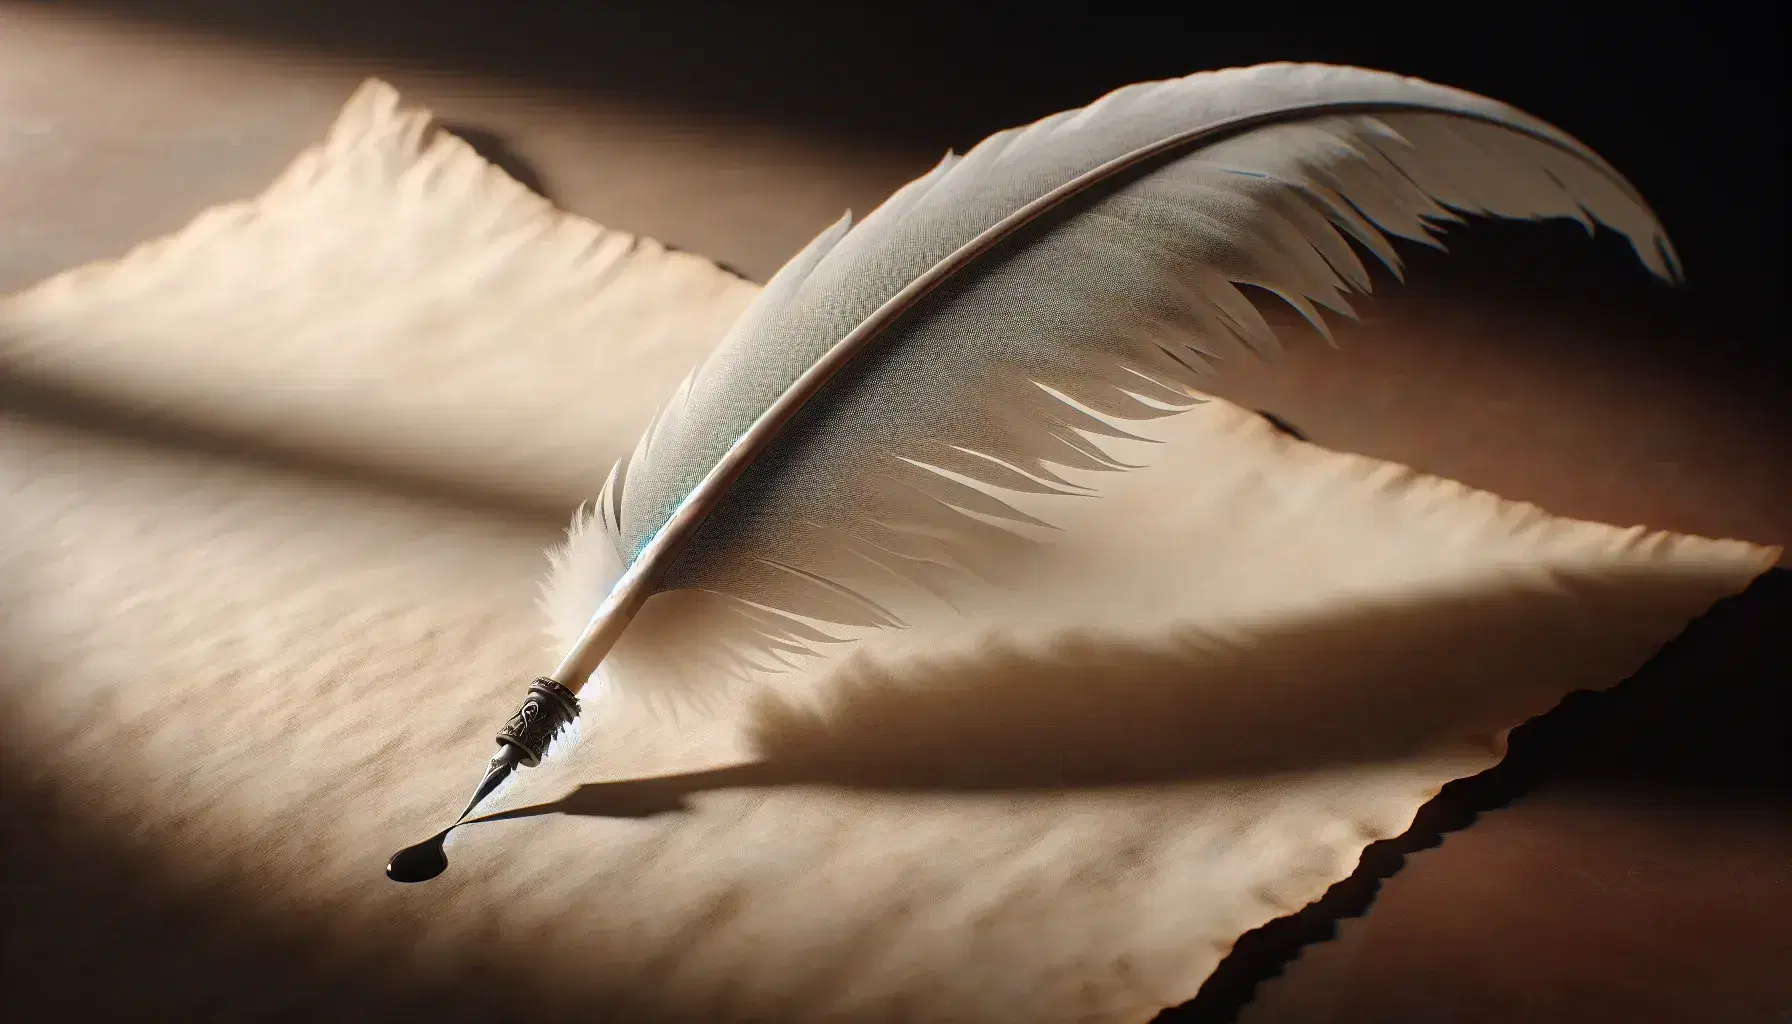 Traditional quill pen with white and gray feathers resting on blank antique parchment paper, against a blurred dark wooden background.